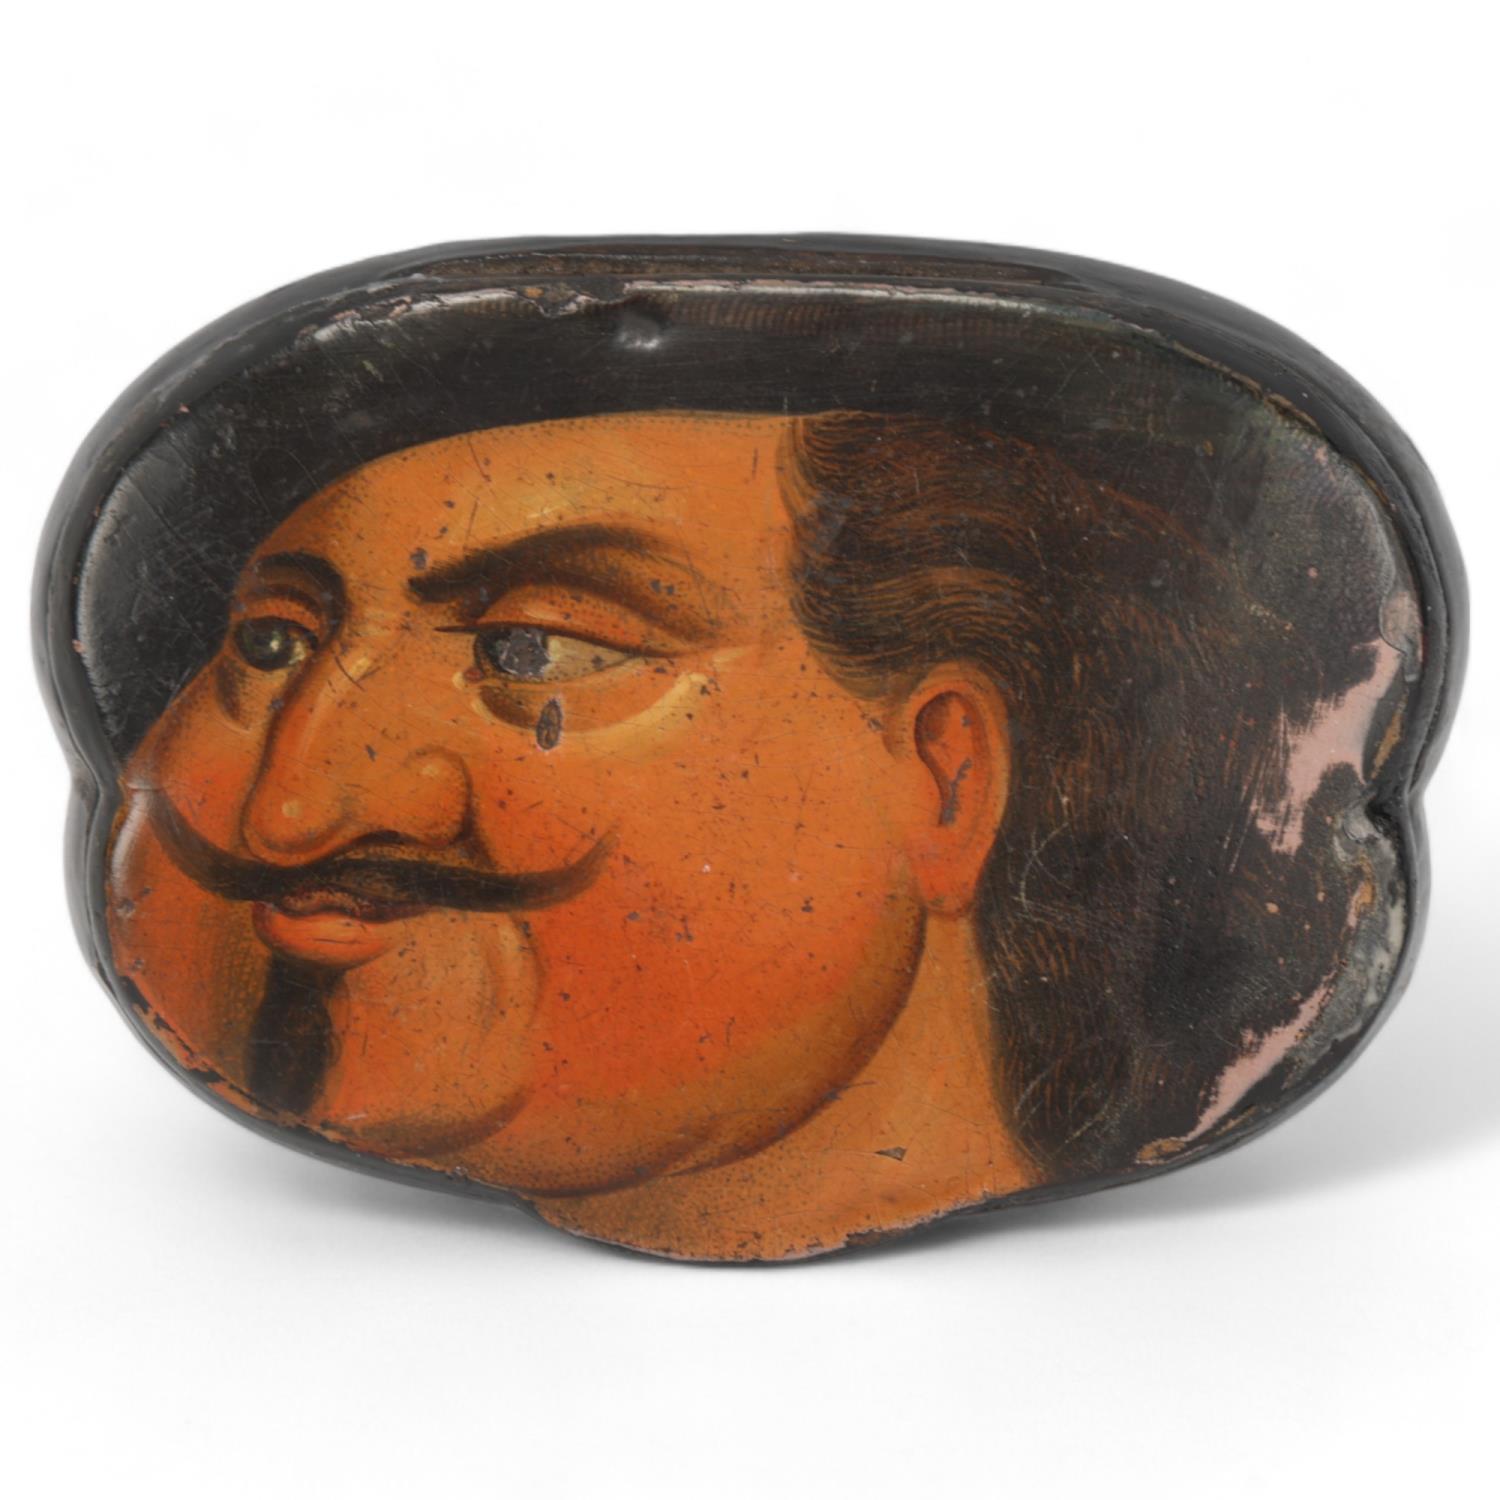 A 19th century lacquer snuffbox, the lid having a painted portrait of a gentleman, length 7cm